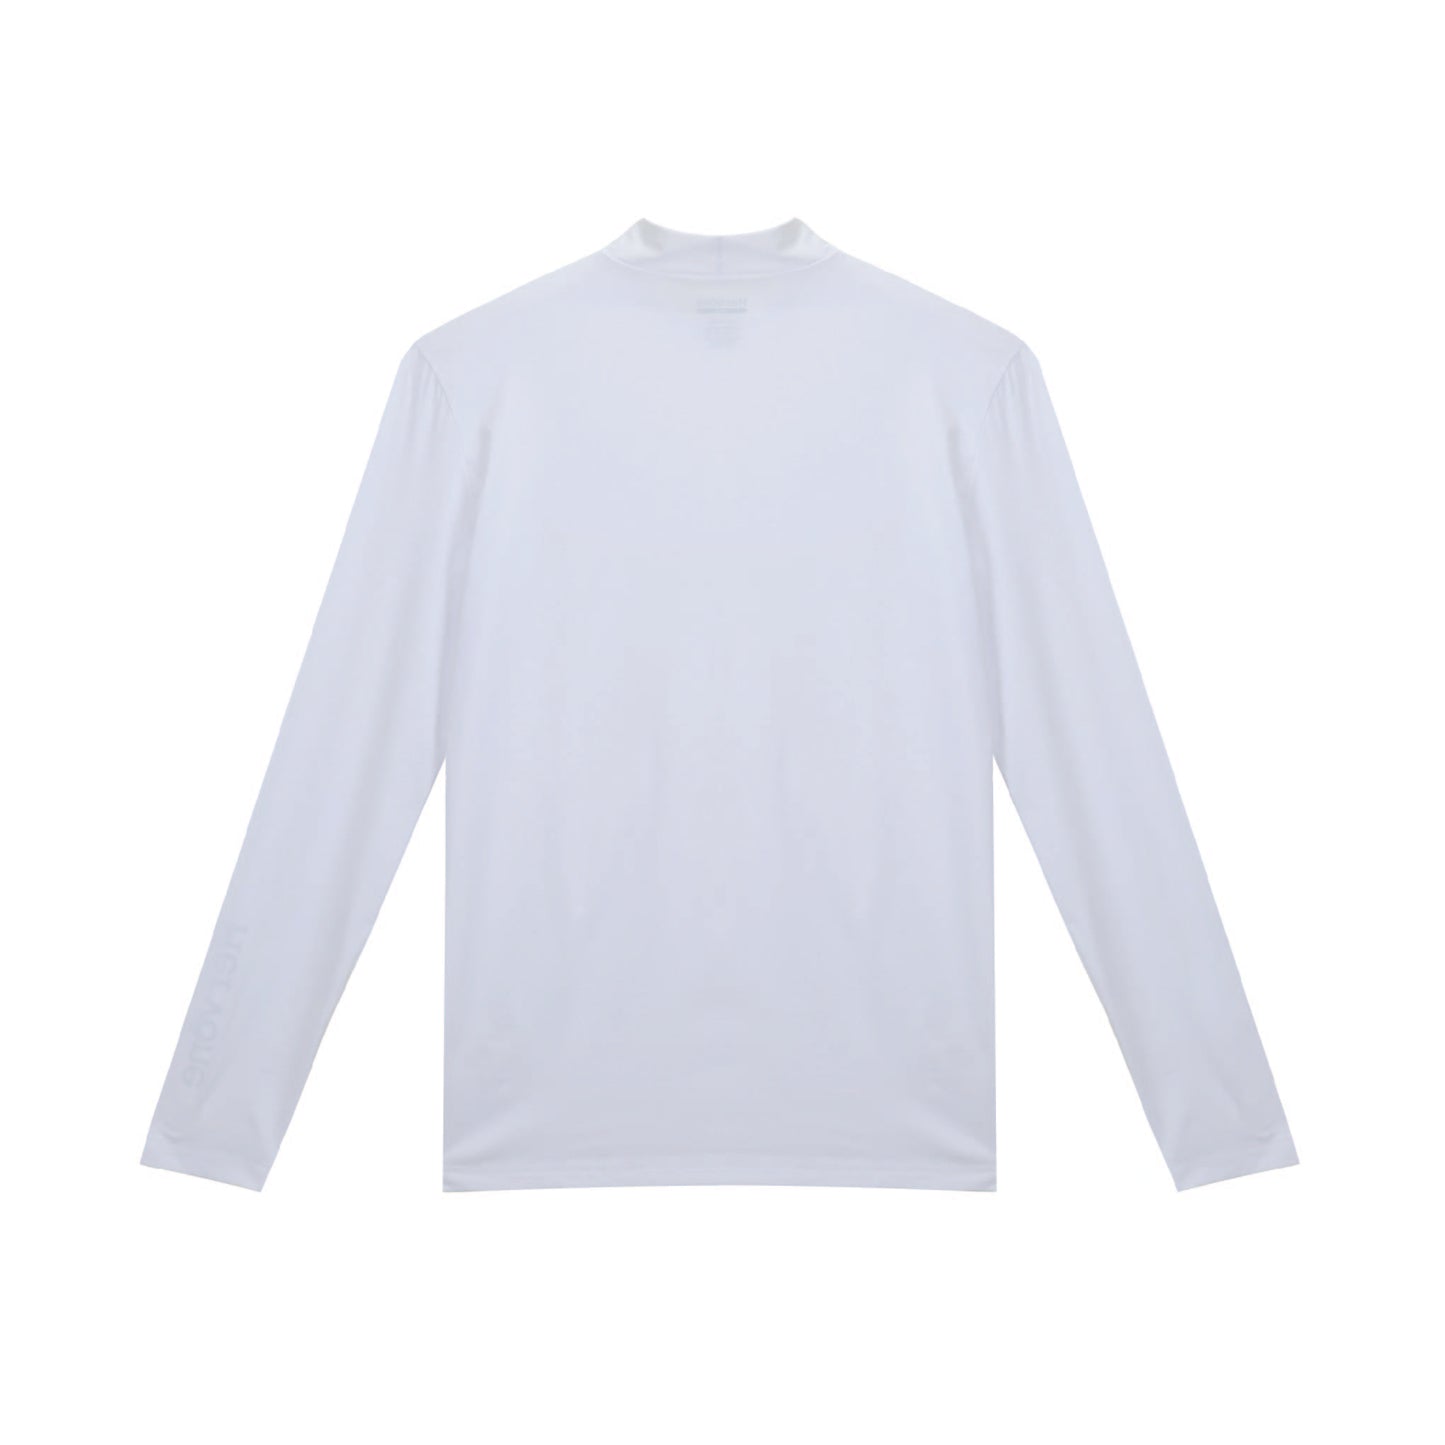 Women's Noa Cooling Long Sleeves (1+1 Event)